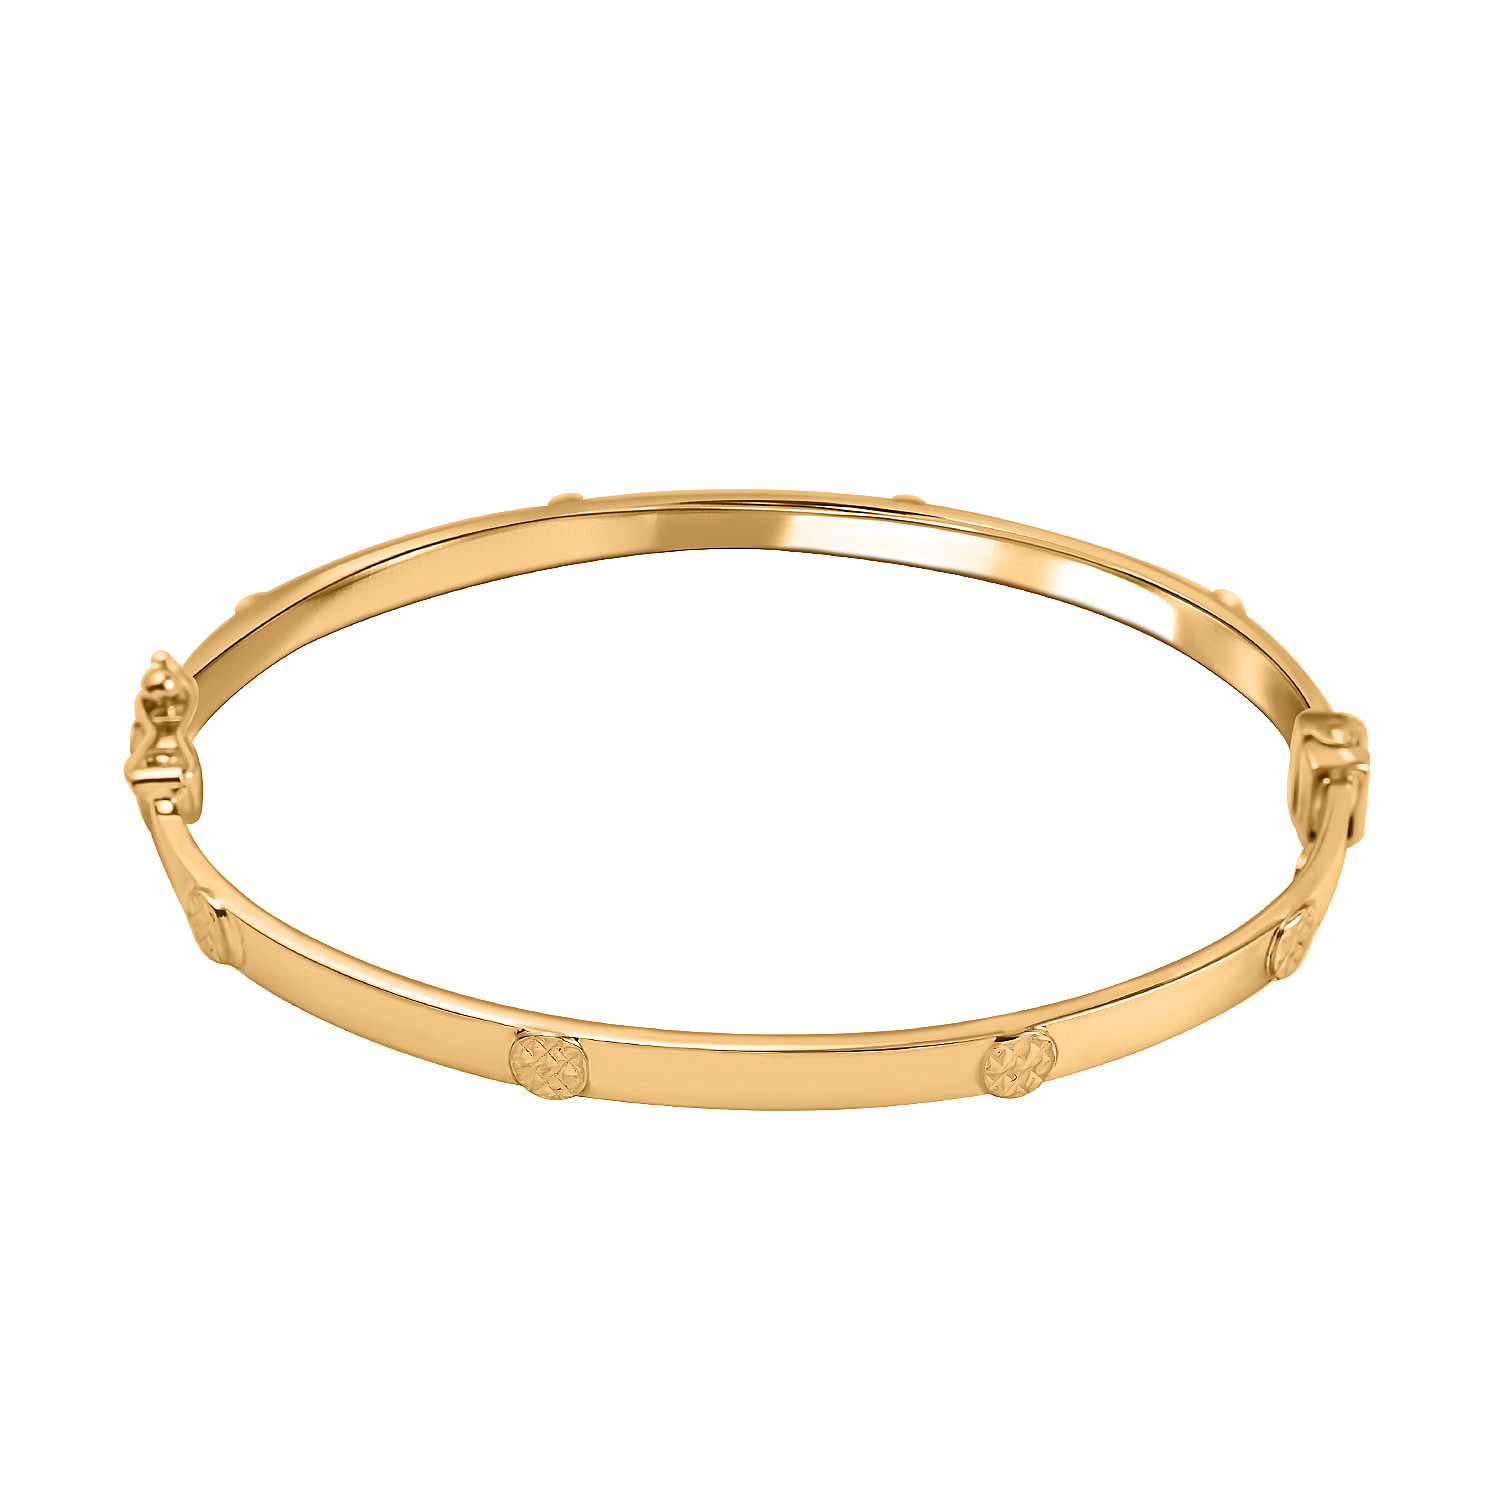 Maestro Collection - 9K Yellow Gold Bangle (Size 7)